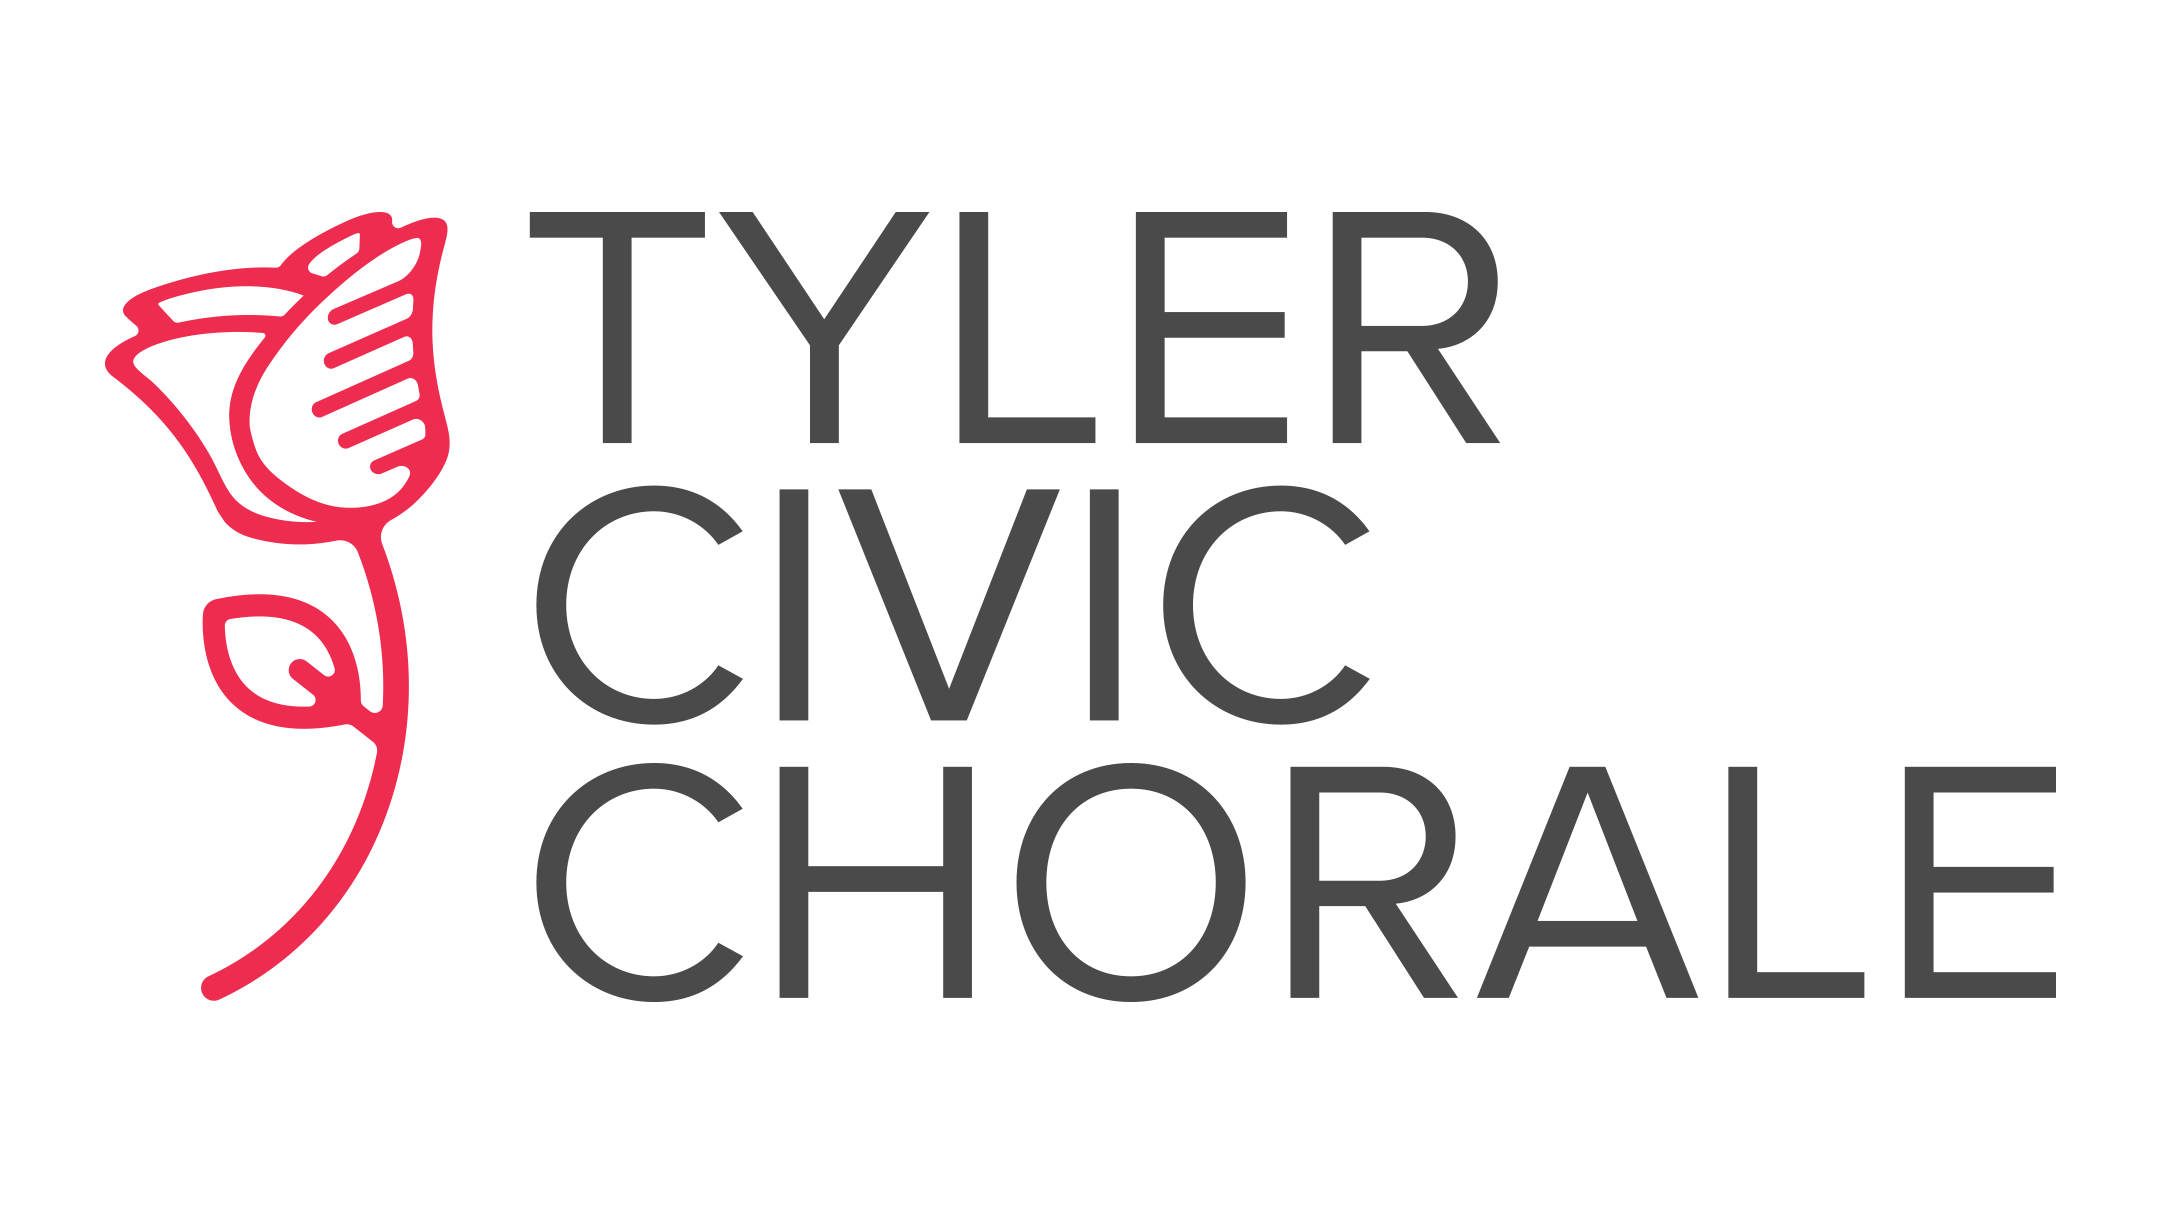 Tyler Civic Chorale